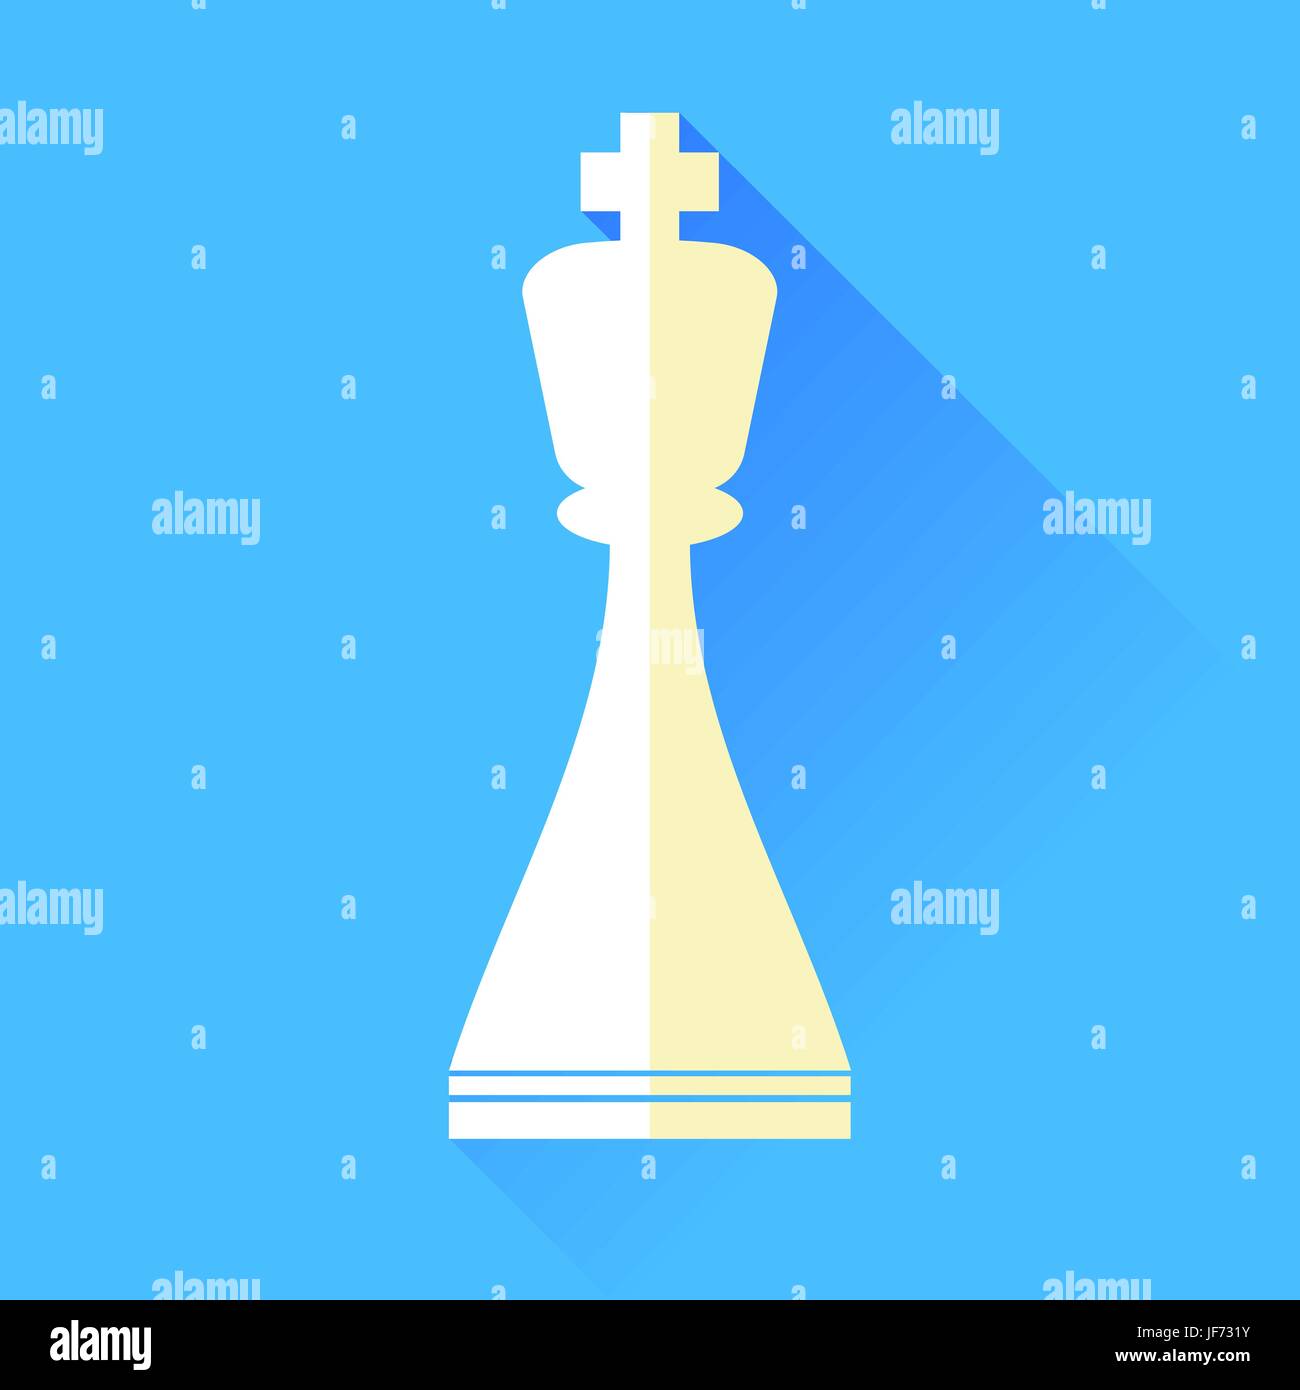 King Chess Icon Isolated on Blue Background Stock Vector